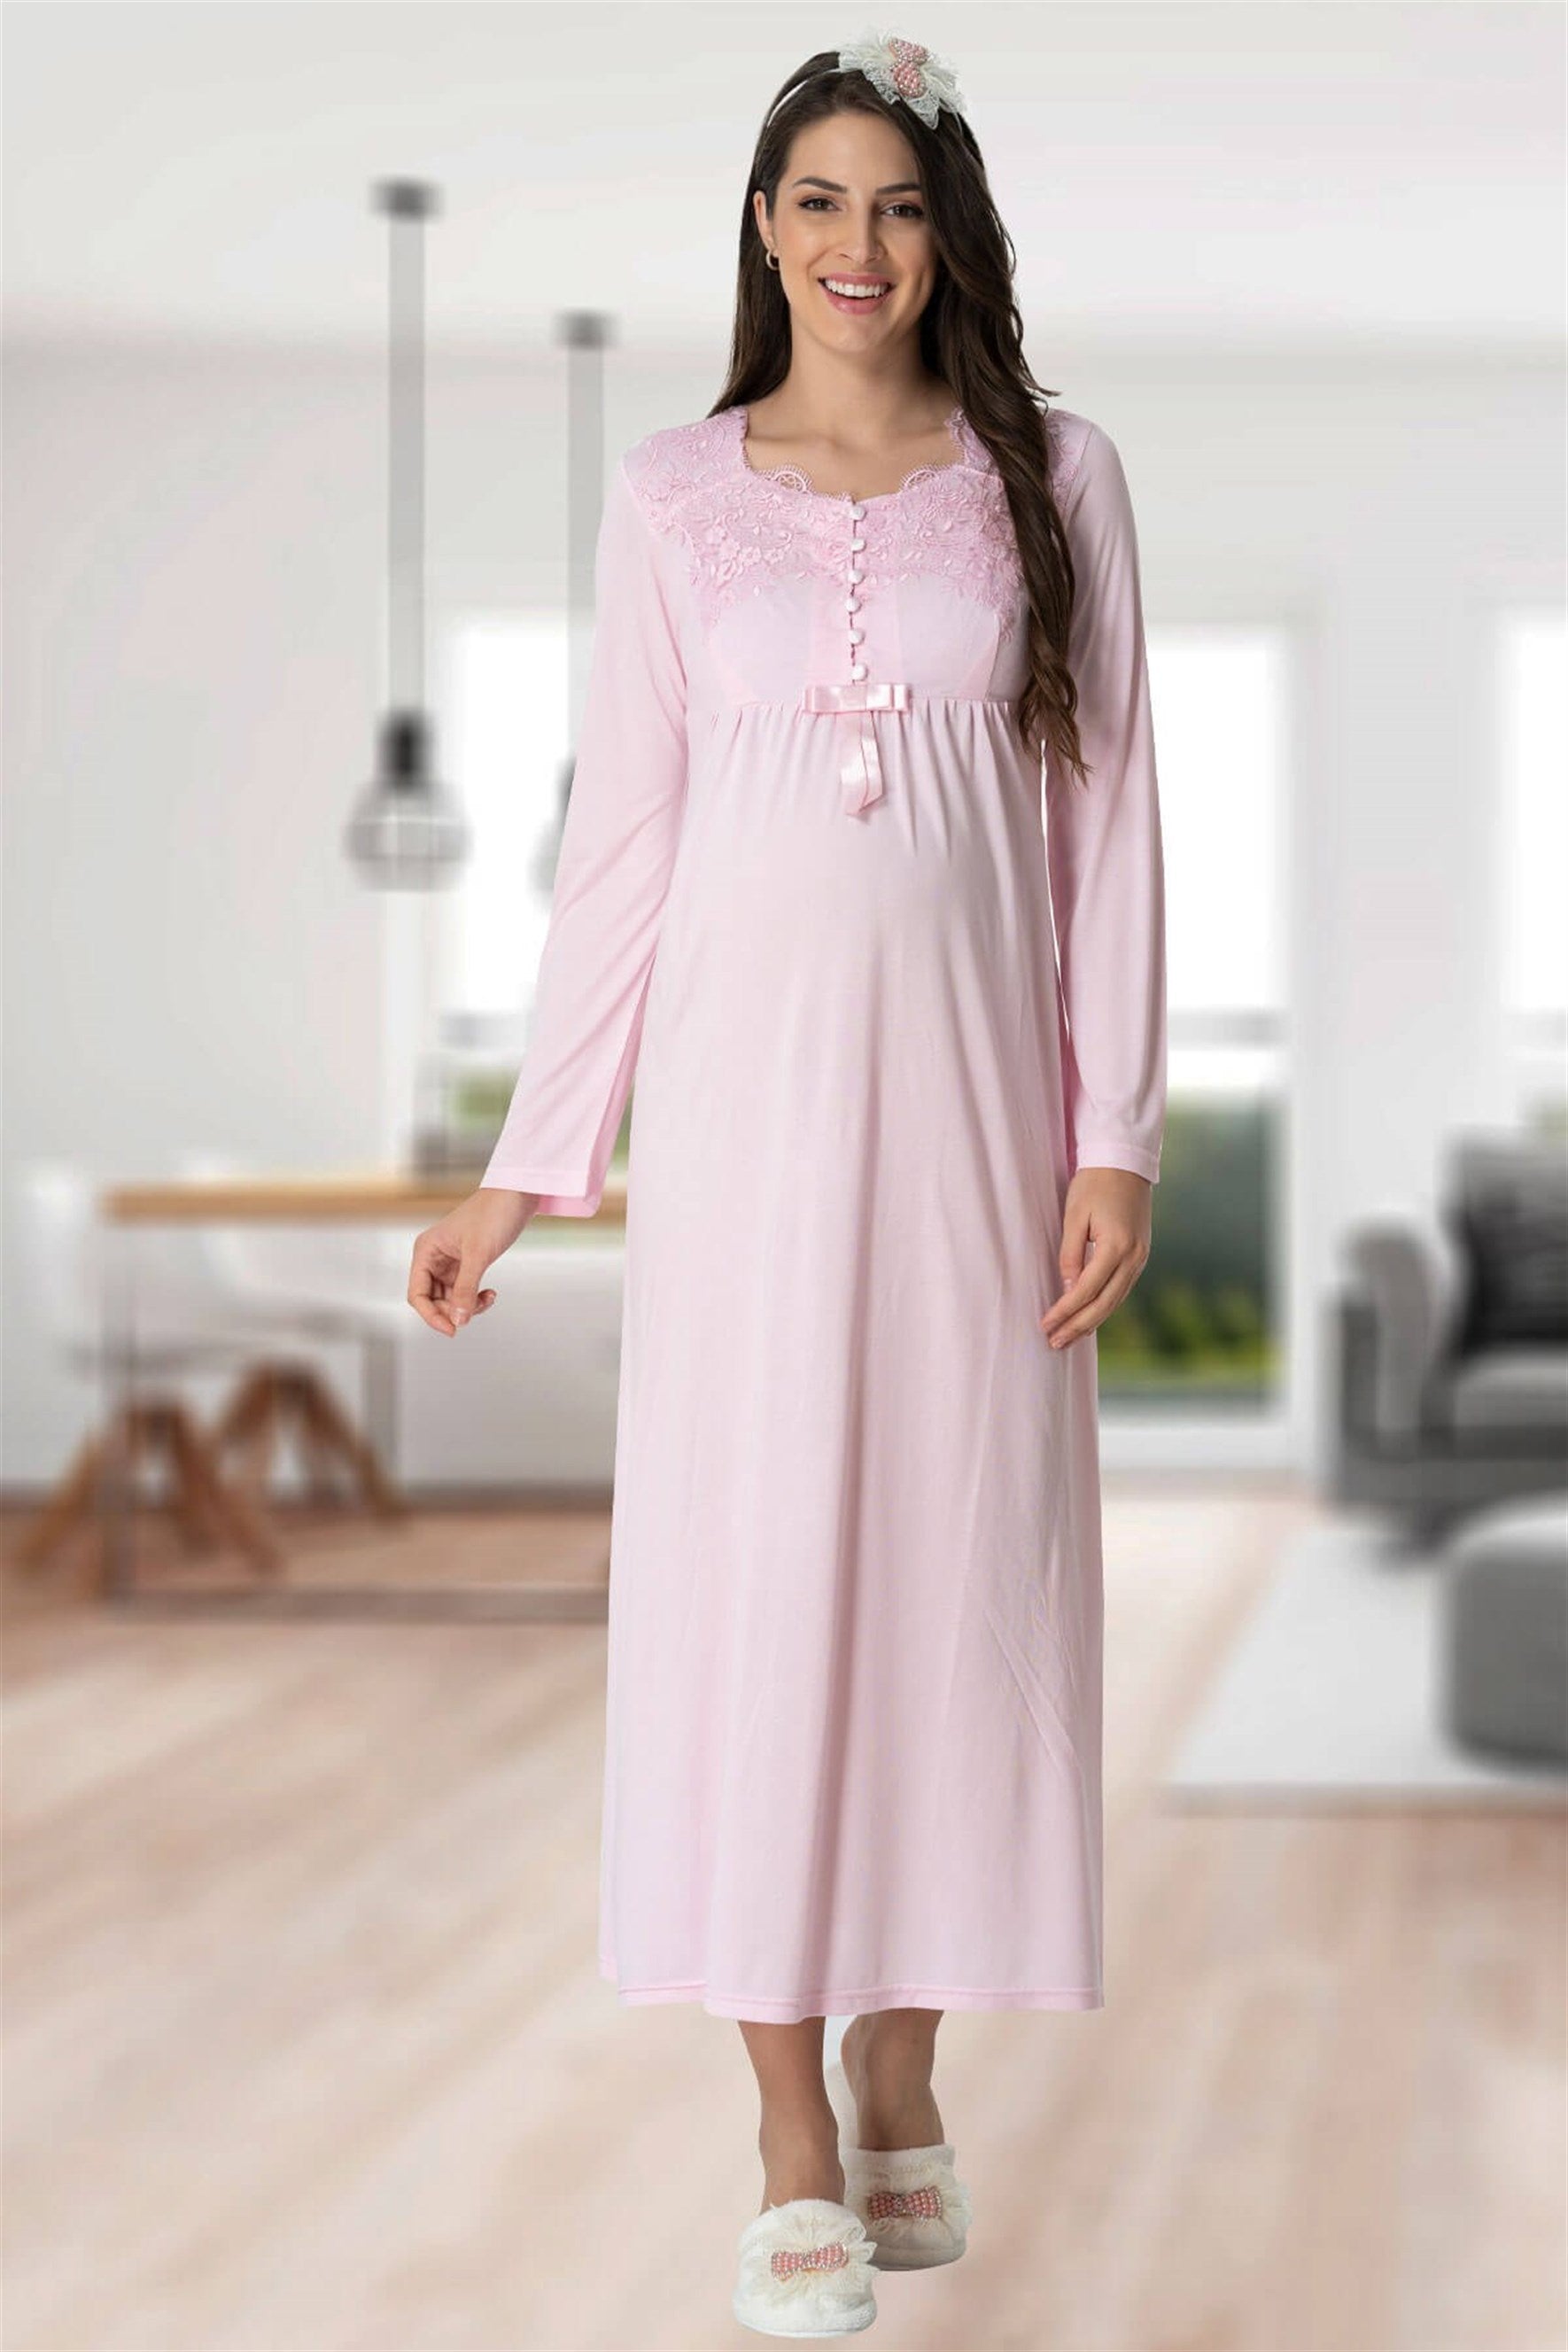 Shopymommy 5417 Elegant Lace Maternity & Nursing Nightgown With Robe Pink